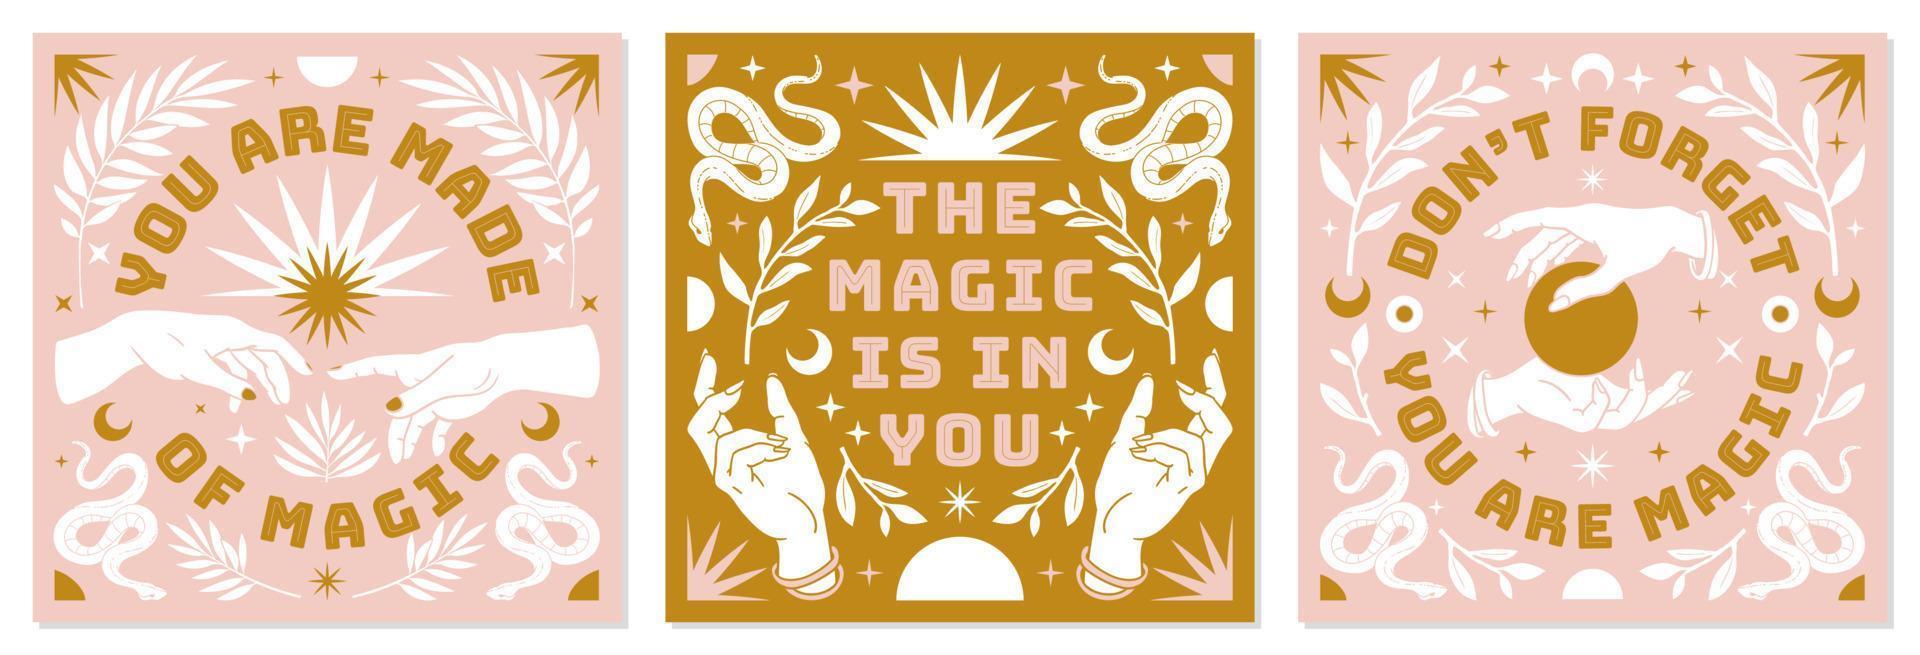 Boho mystical posters with inspirational quotes about energy, magic and good vibes in trendy bohemian style. vector